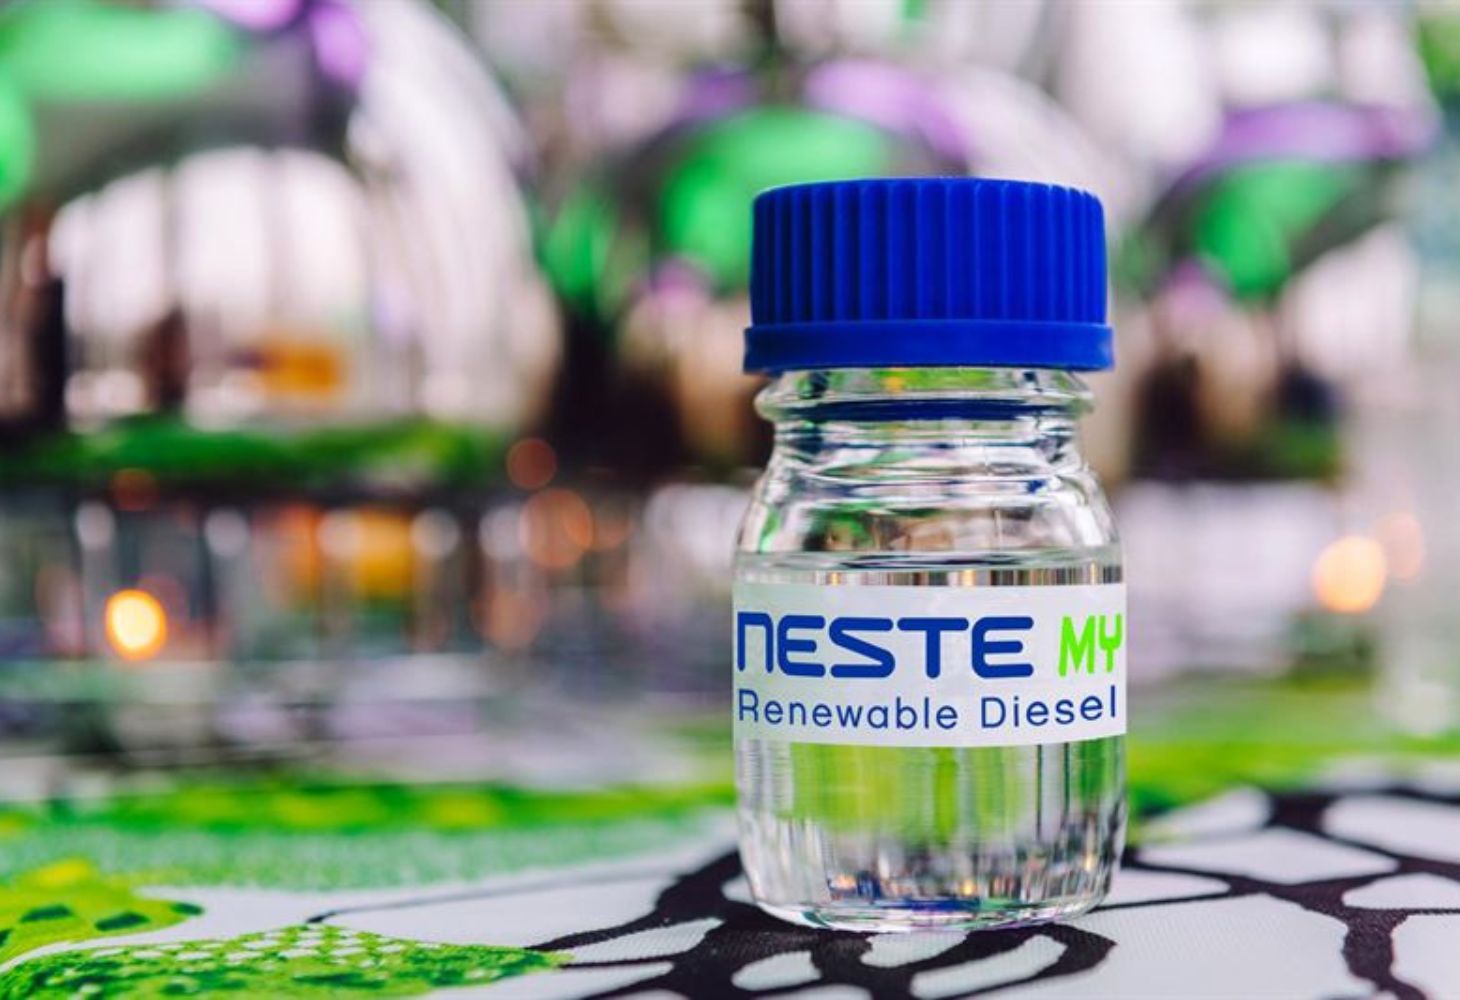 Neste partners with PetroCard to supply renewable diesel